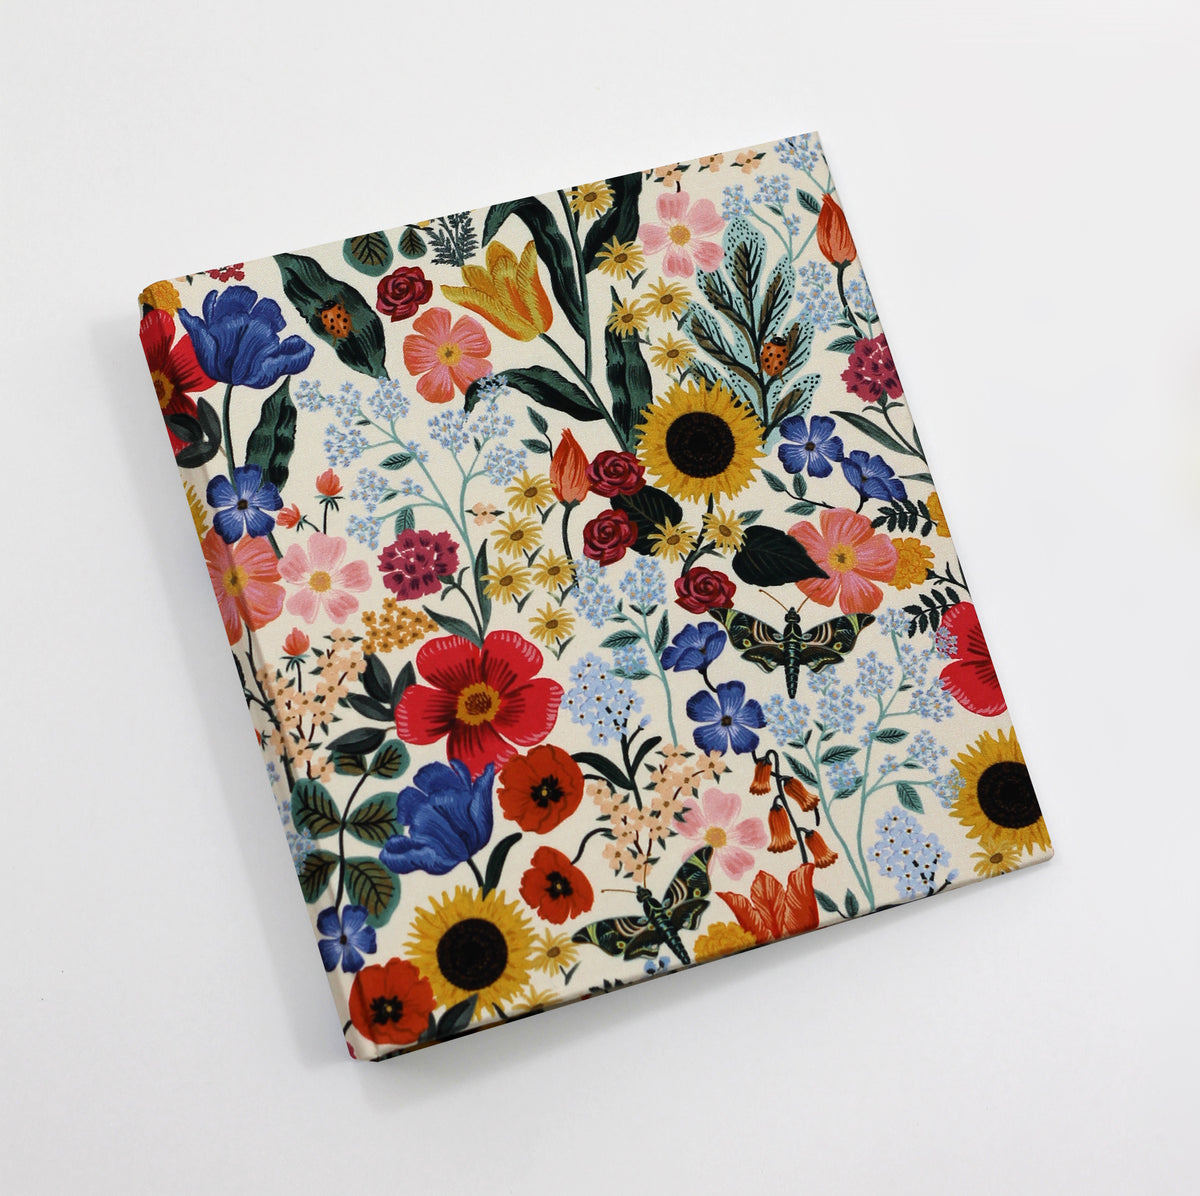 Medium Photo Binder For 4 x 6 Photos | Limited Edition Cover: Blossom